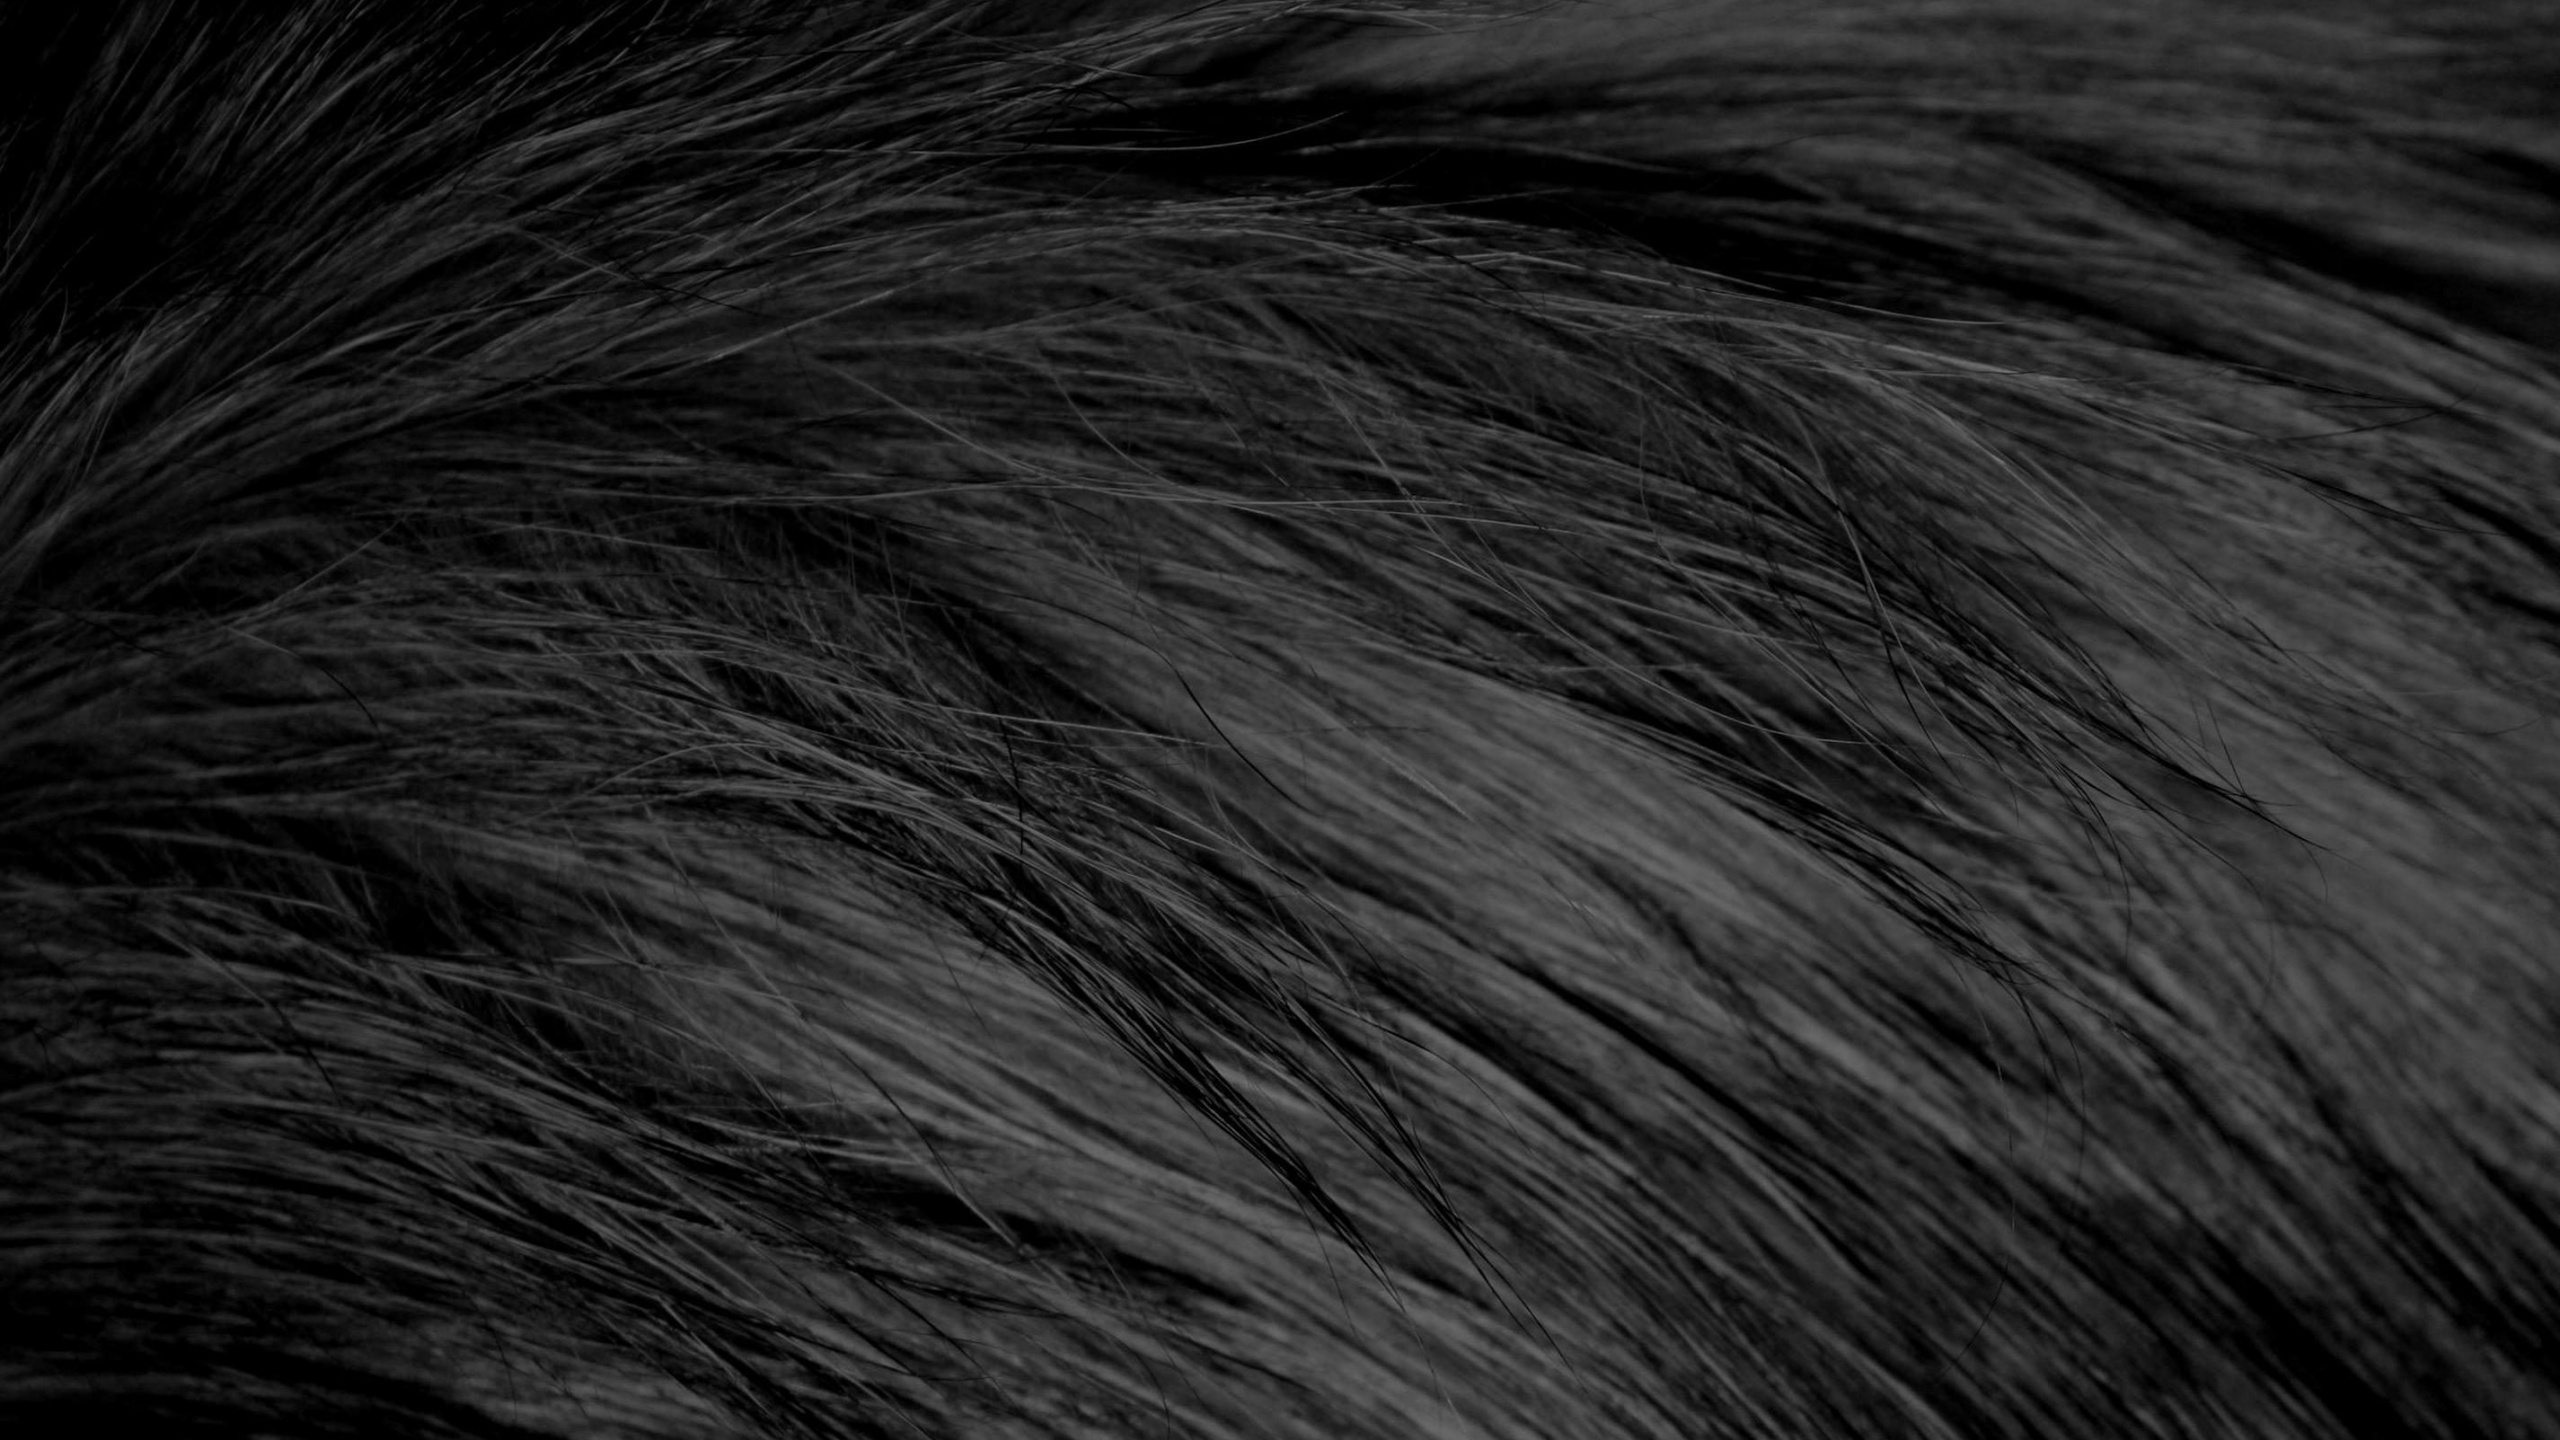 Black and White Human Hair. Wallpaper in 2560x1440 Resolution